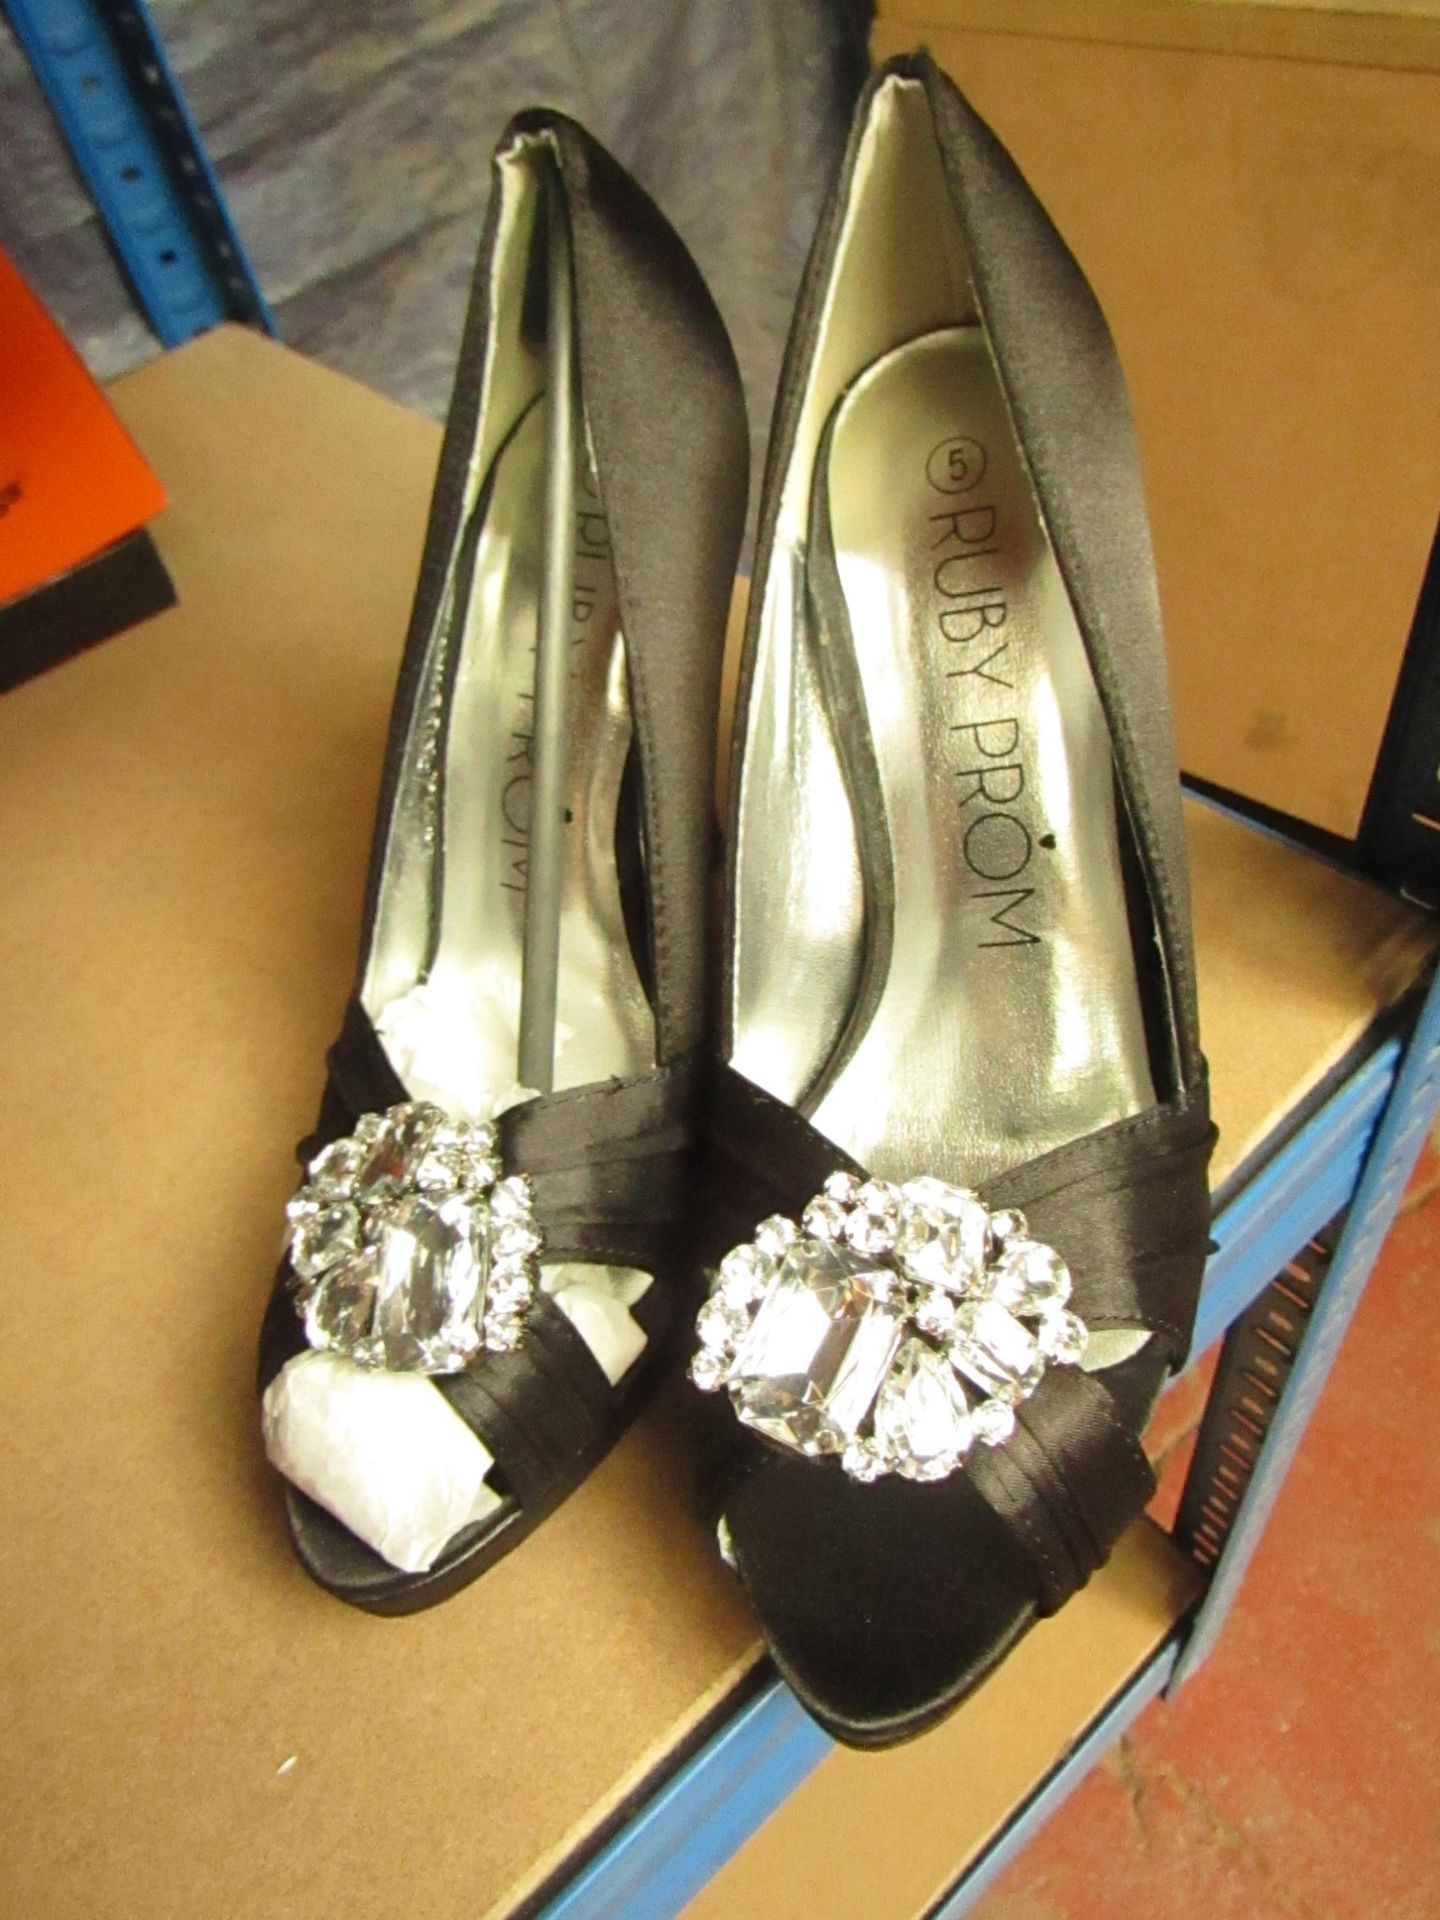 Ruby Prom Black Platform High Heel Shoes with Embelishments size 6 new (see image for design)